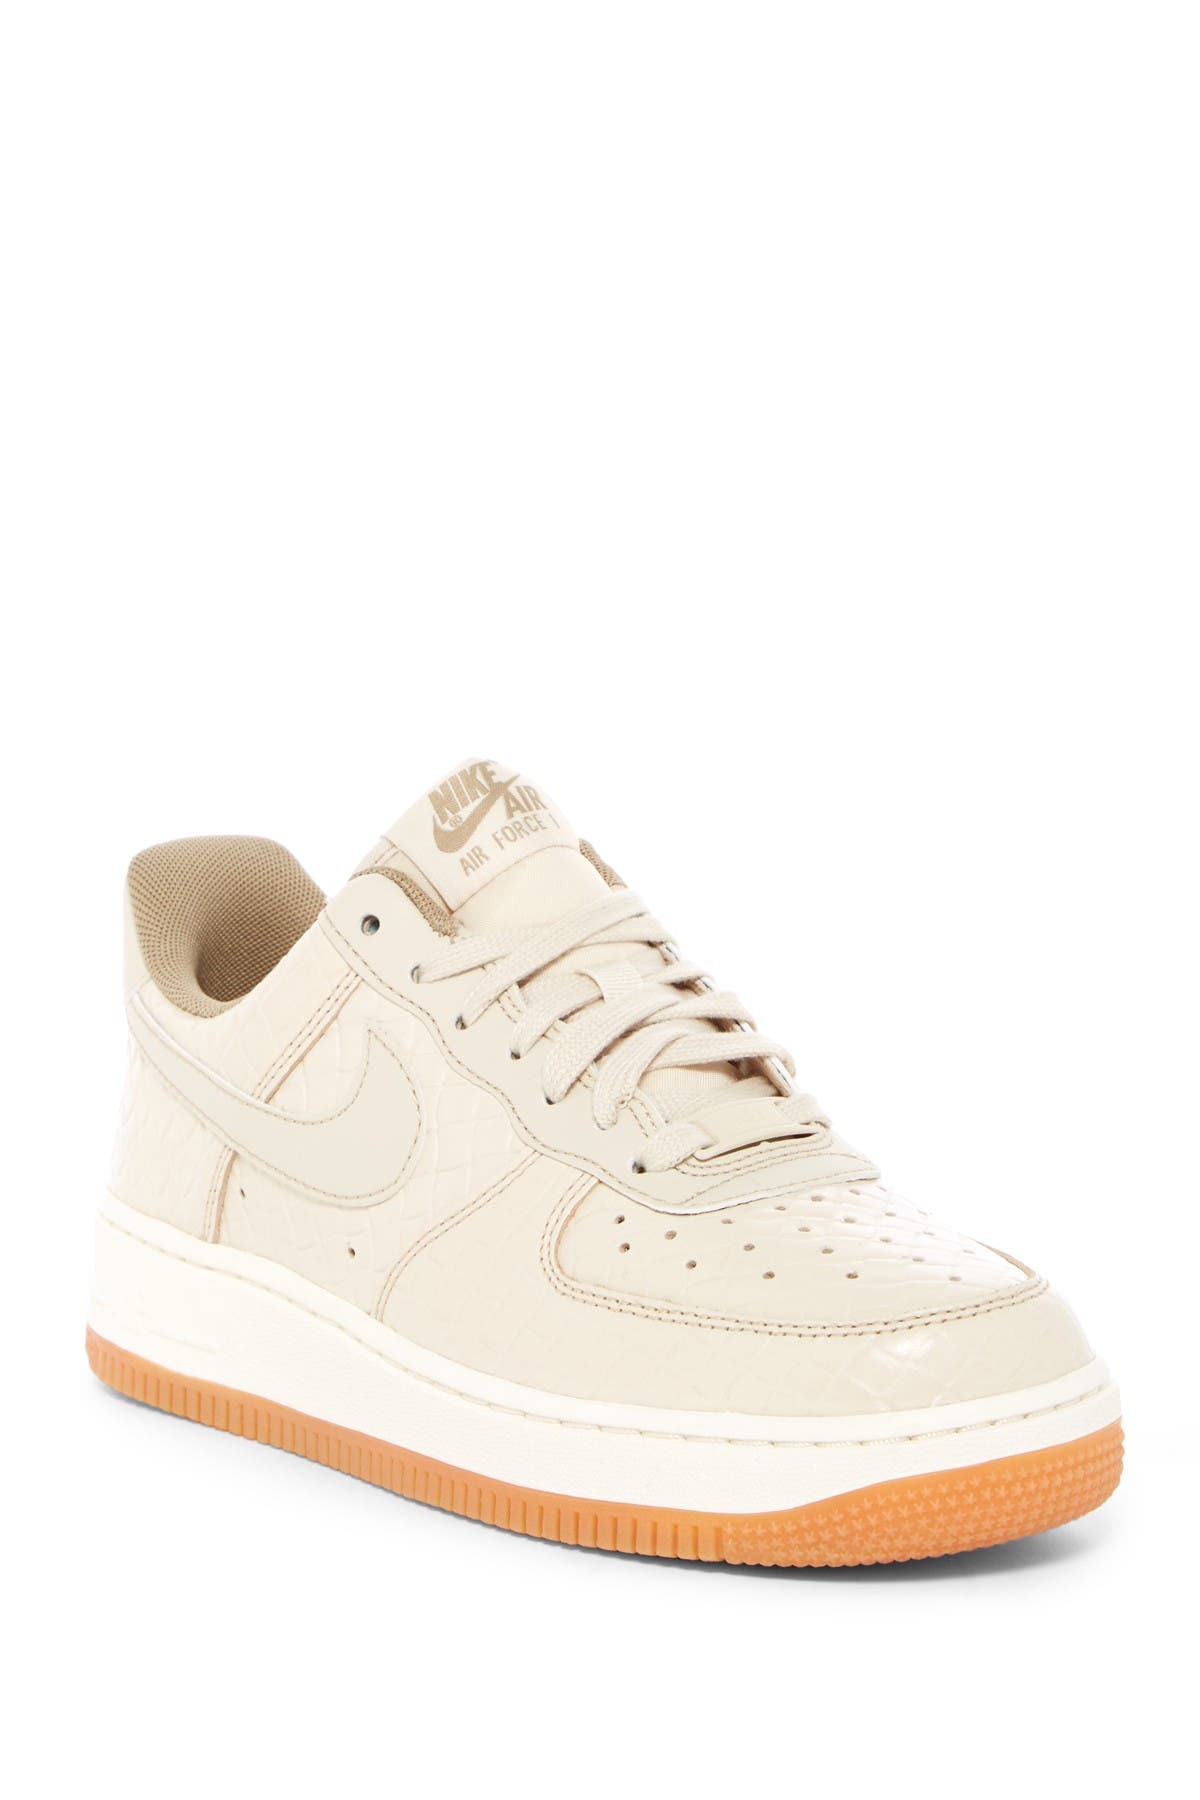 air force ones womens nordstrom